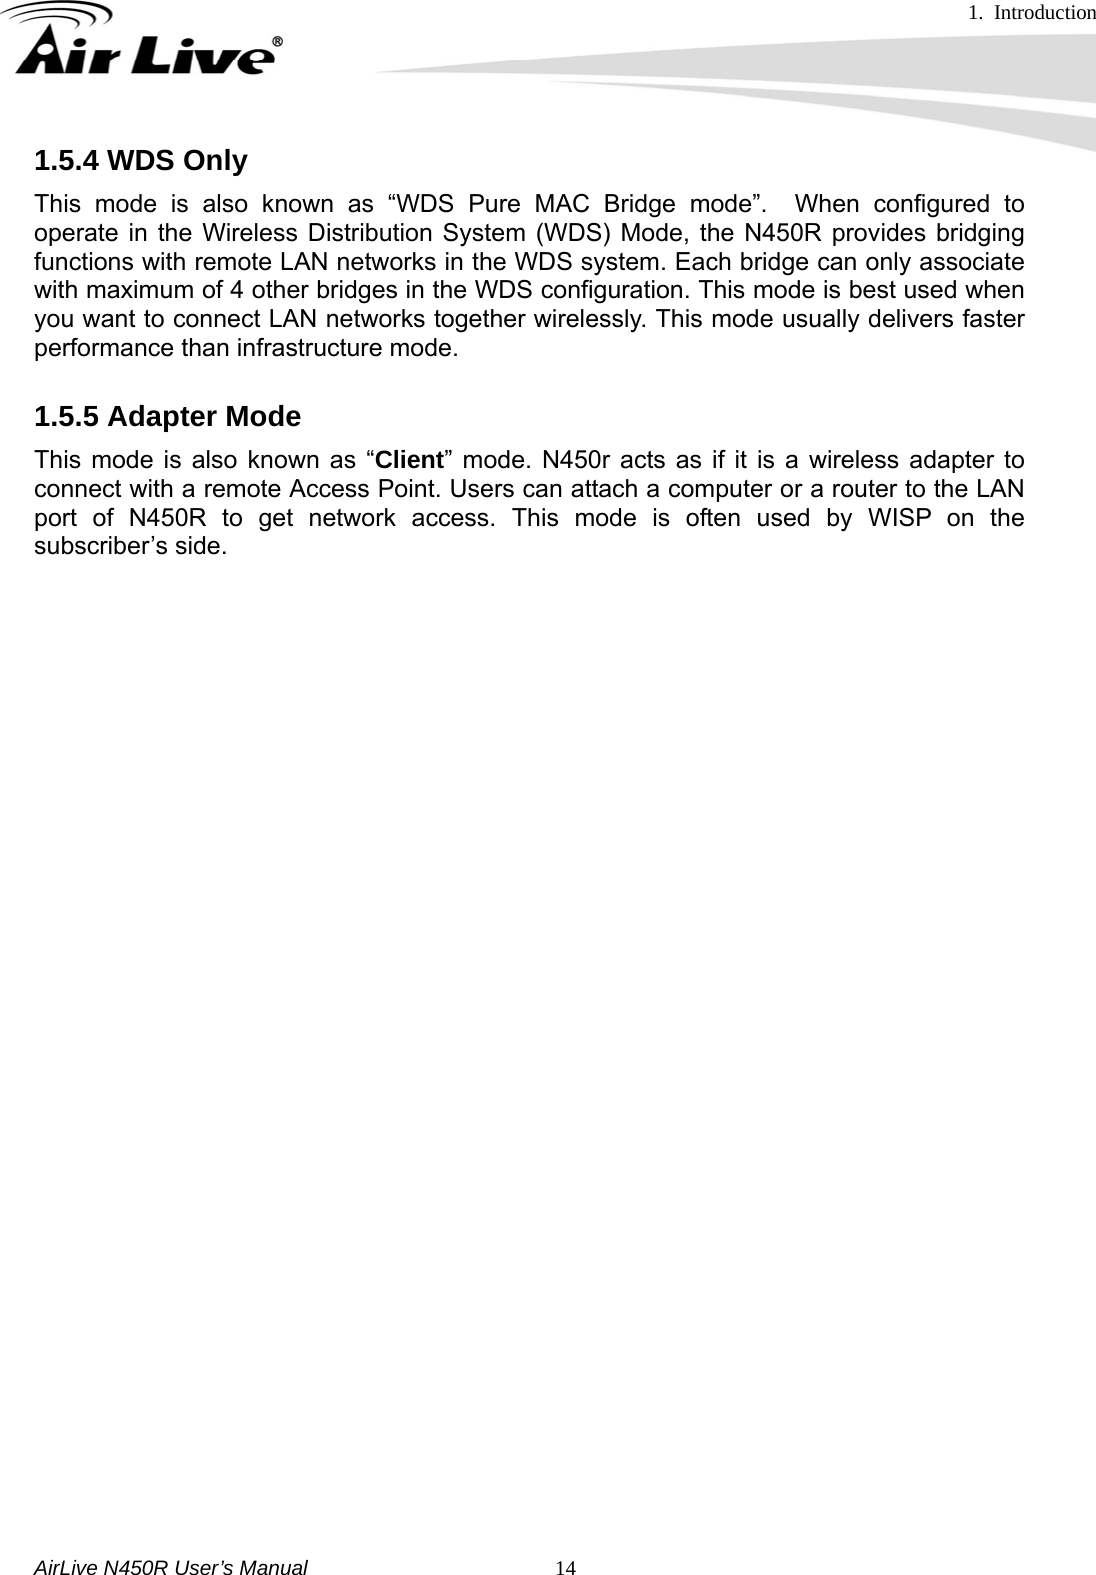 1. Introduction     AirLive N450R User’s Manual   141.5.4 WDS Only This mode is also known as “WDS Pure MAC Bridge mode”.  When configured to operate in the Wireless Distribution System (WDS) Mode, the N450R provides bridging functions with remote LAN networks in the WDS system. Each bridge can only associate with maximum of 4 other bridges in the WDS configuration. This mode is best used when you want to connect LAN networks together wirelessly. This mode usually delivers faster performance than infrastructure mode. 1.5.5 Adapter Mode This mode is also known as “Client” mode. N450r acts as if it is a wireless adapter to connect with a remote Access Point. Users can attach a computer or a router to the LAN port of N450R to get network access. This mode is often used by WISP on the subscriber’s side.                             